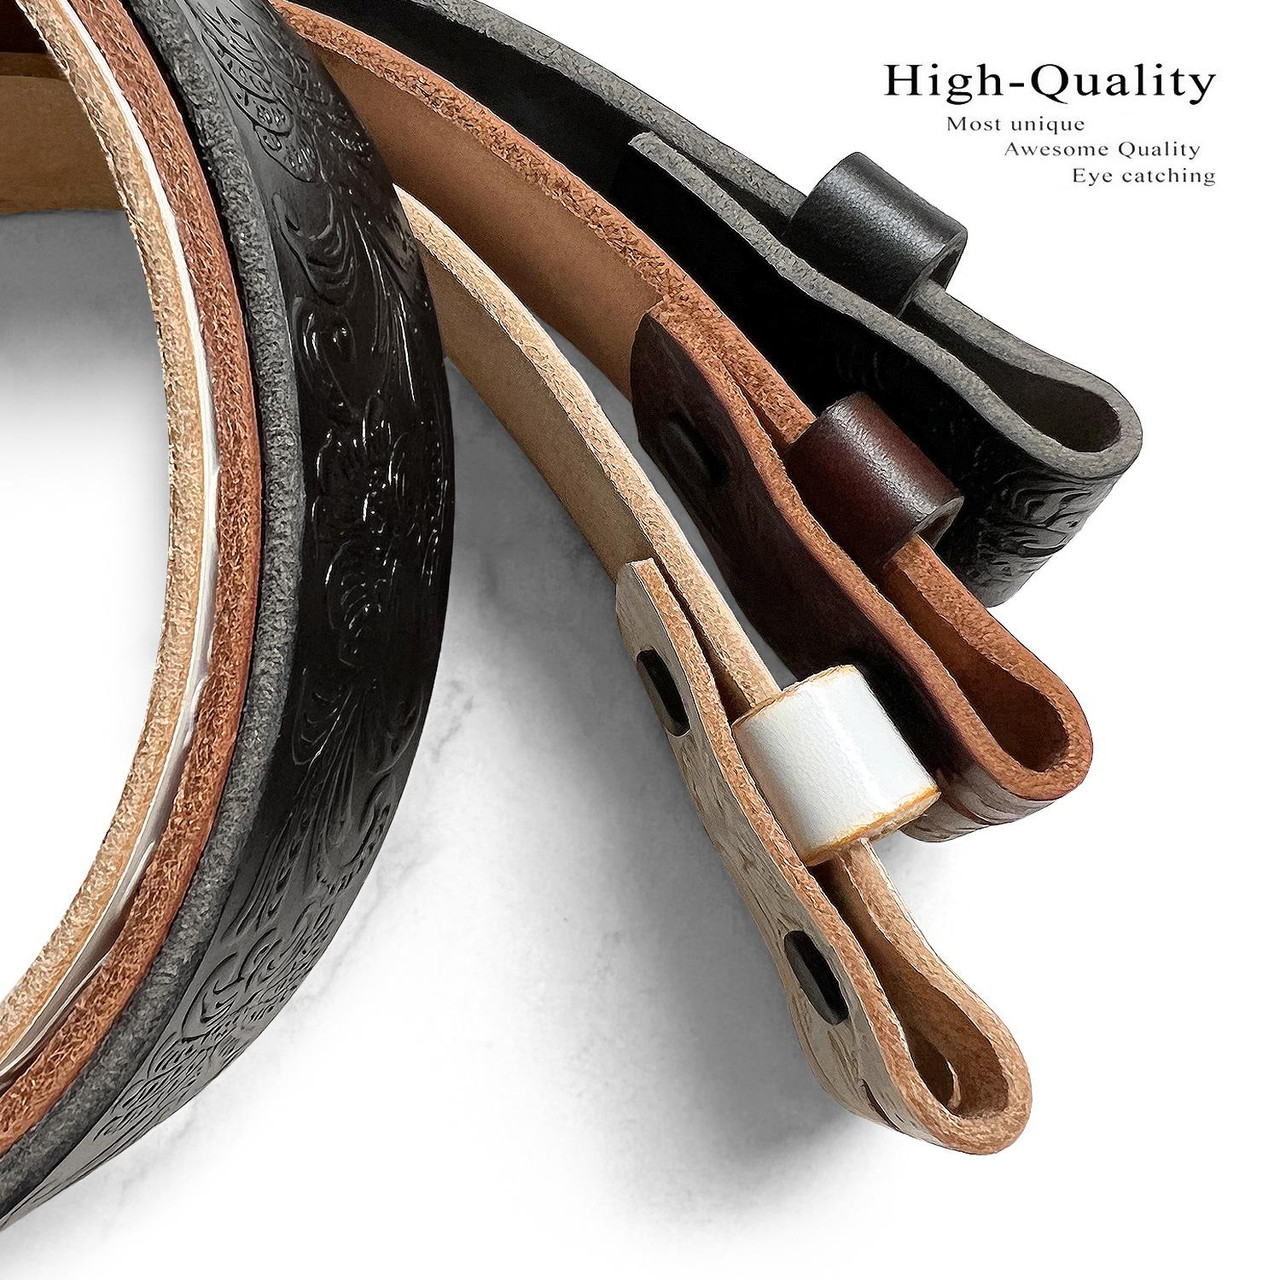 F&L CLASSIC Full Grain Western Engraved Tooled Leather Belt Strap or Belt  1-1/2 w/Snaps for Interchangeable Buckles,USA